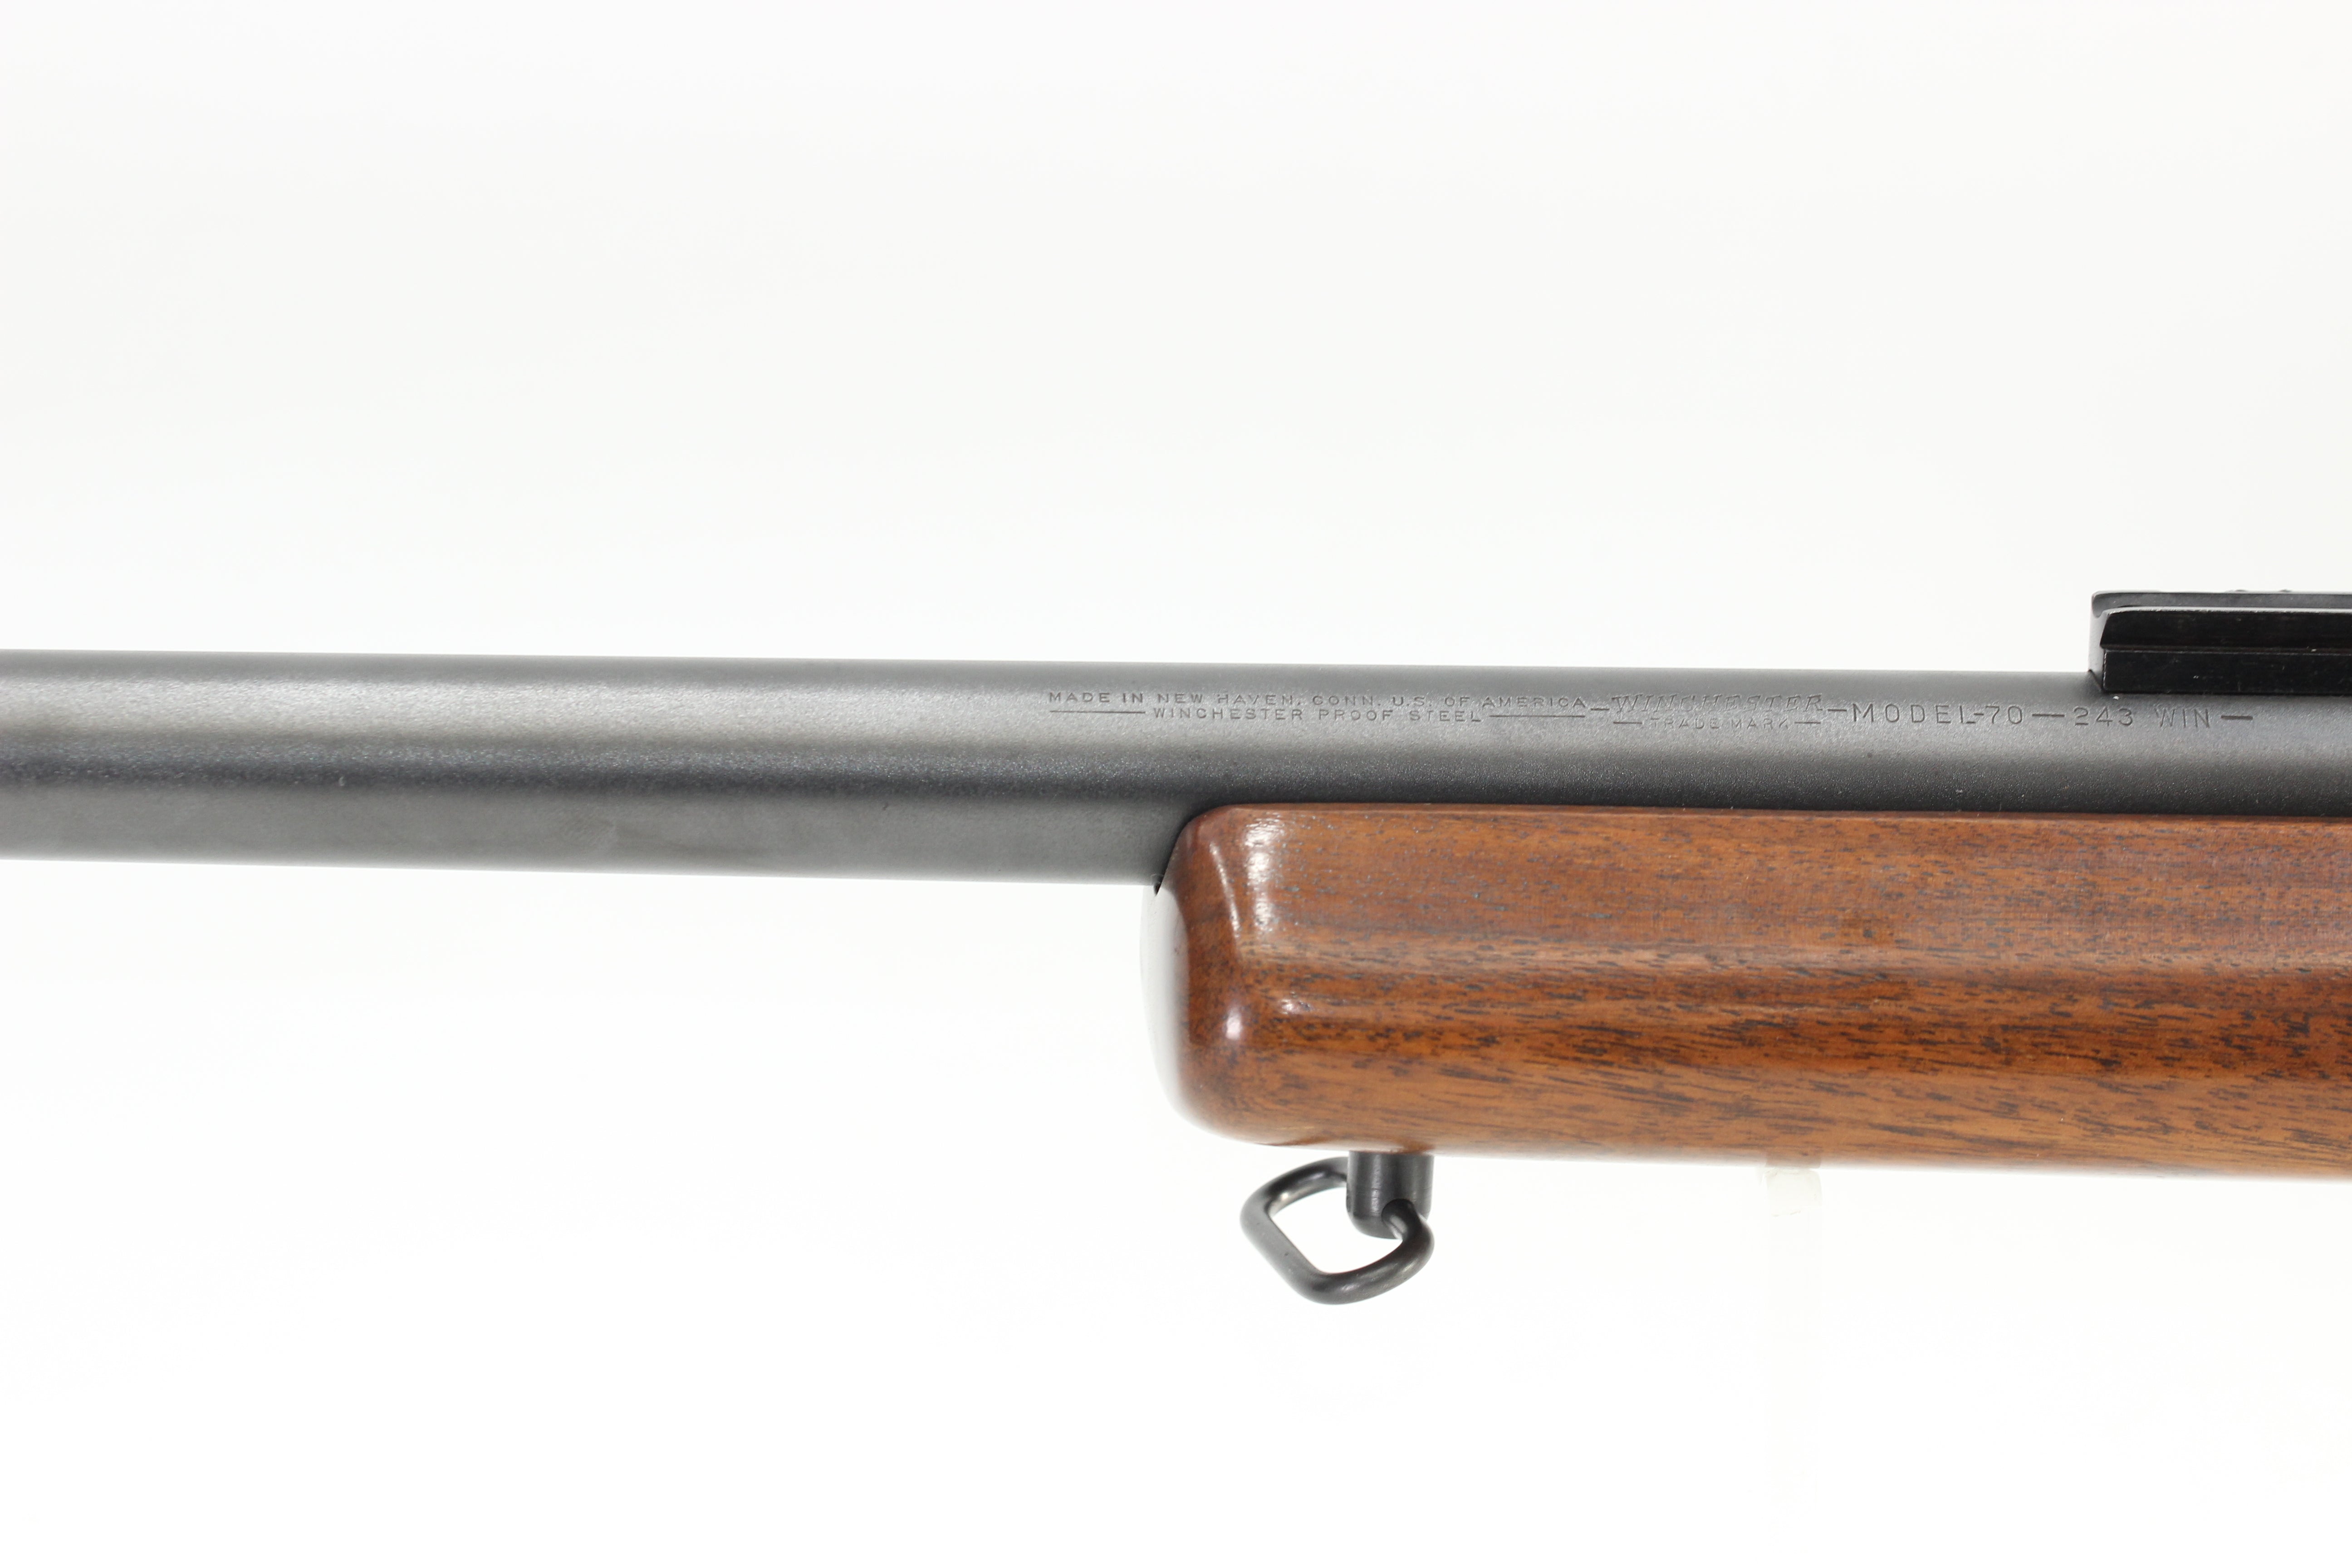 .243 Winchester Target Rifle - 1958